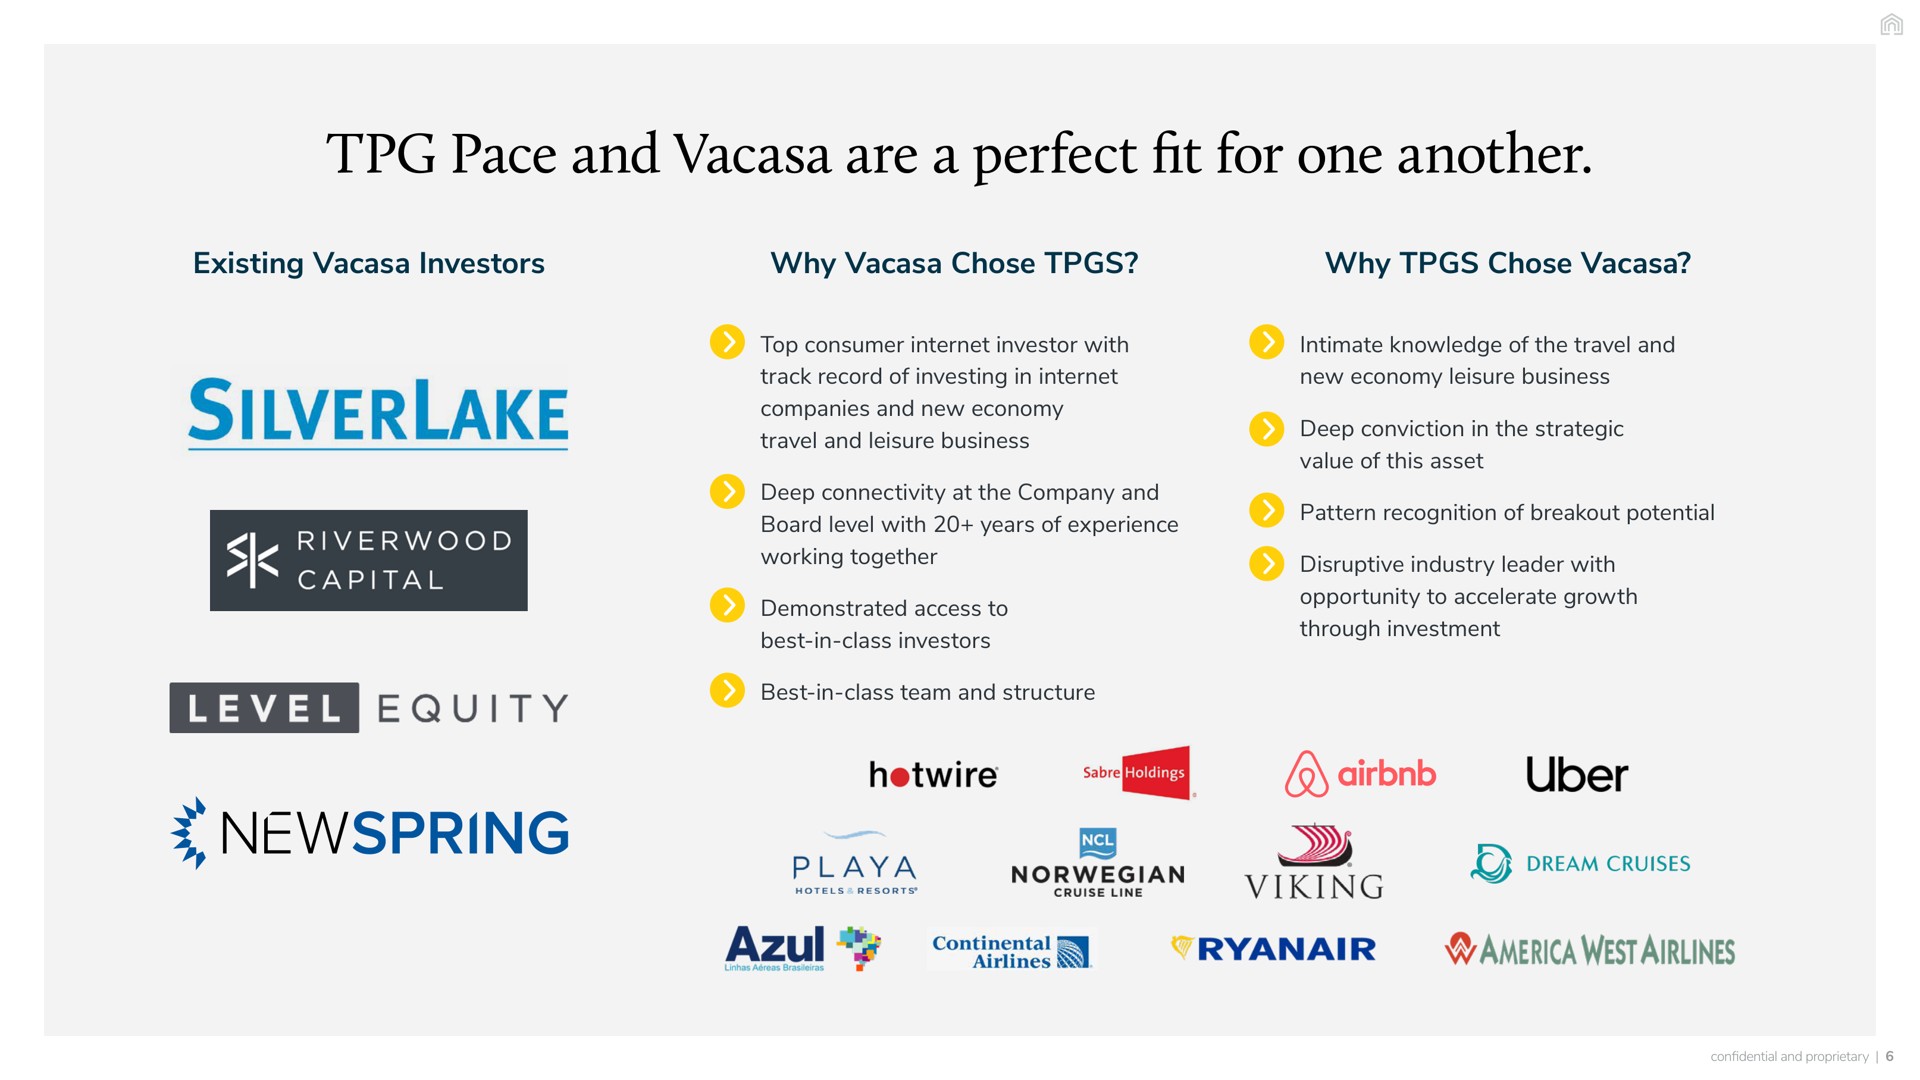 pace and are a perfect fit for one another existing investors why chose why chose capital top consumer investor with intimate knowledge of the travel track record of investing in new economy leisure business companies new economy travel leisure business deep connectivity at the company board level with years of experience working together demonstrated access to best in class investors deep conviction in the strategic value of this asset pattern recognition of breakout potential disruptive industry leader with opportunity to accelerate growth through investment equity best in class team structure playa hotels resorts cruise line viking dream cruises continental | Vacasa